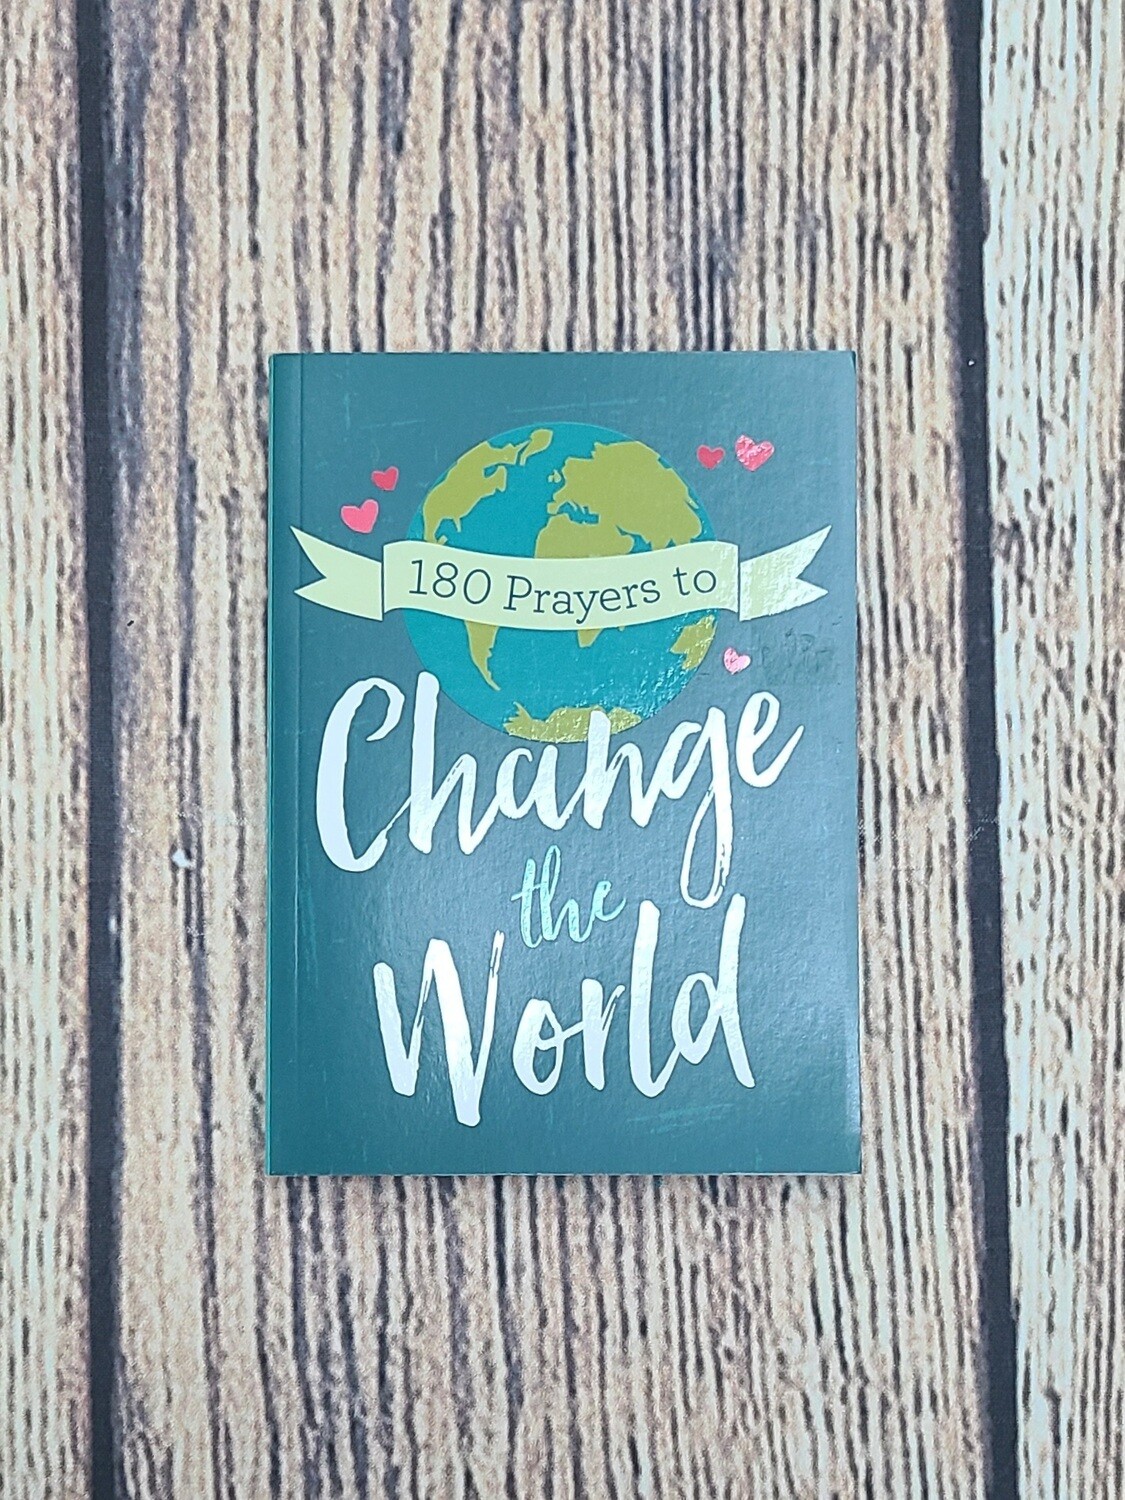 180 Prayers to Change the World by Janice Thompson